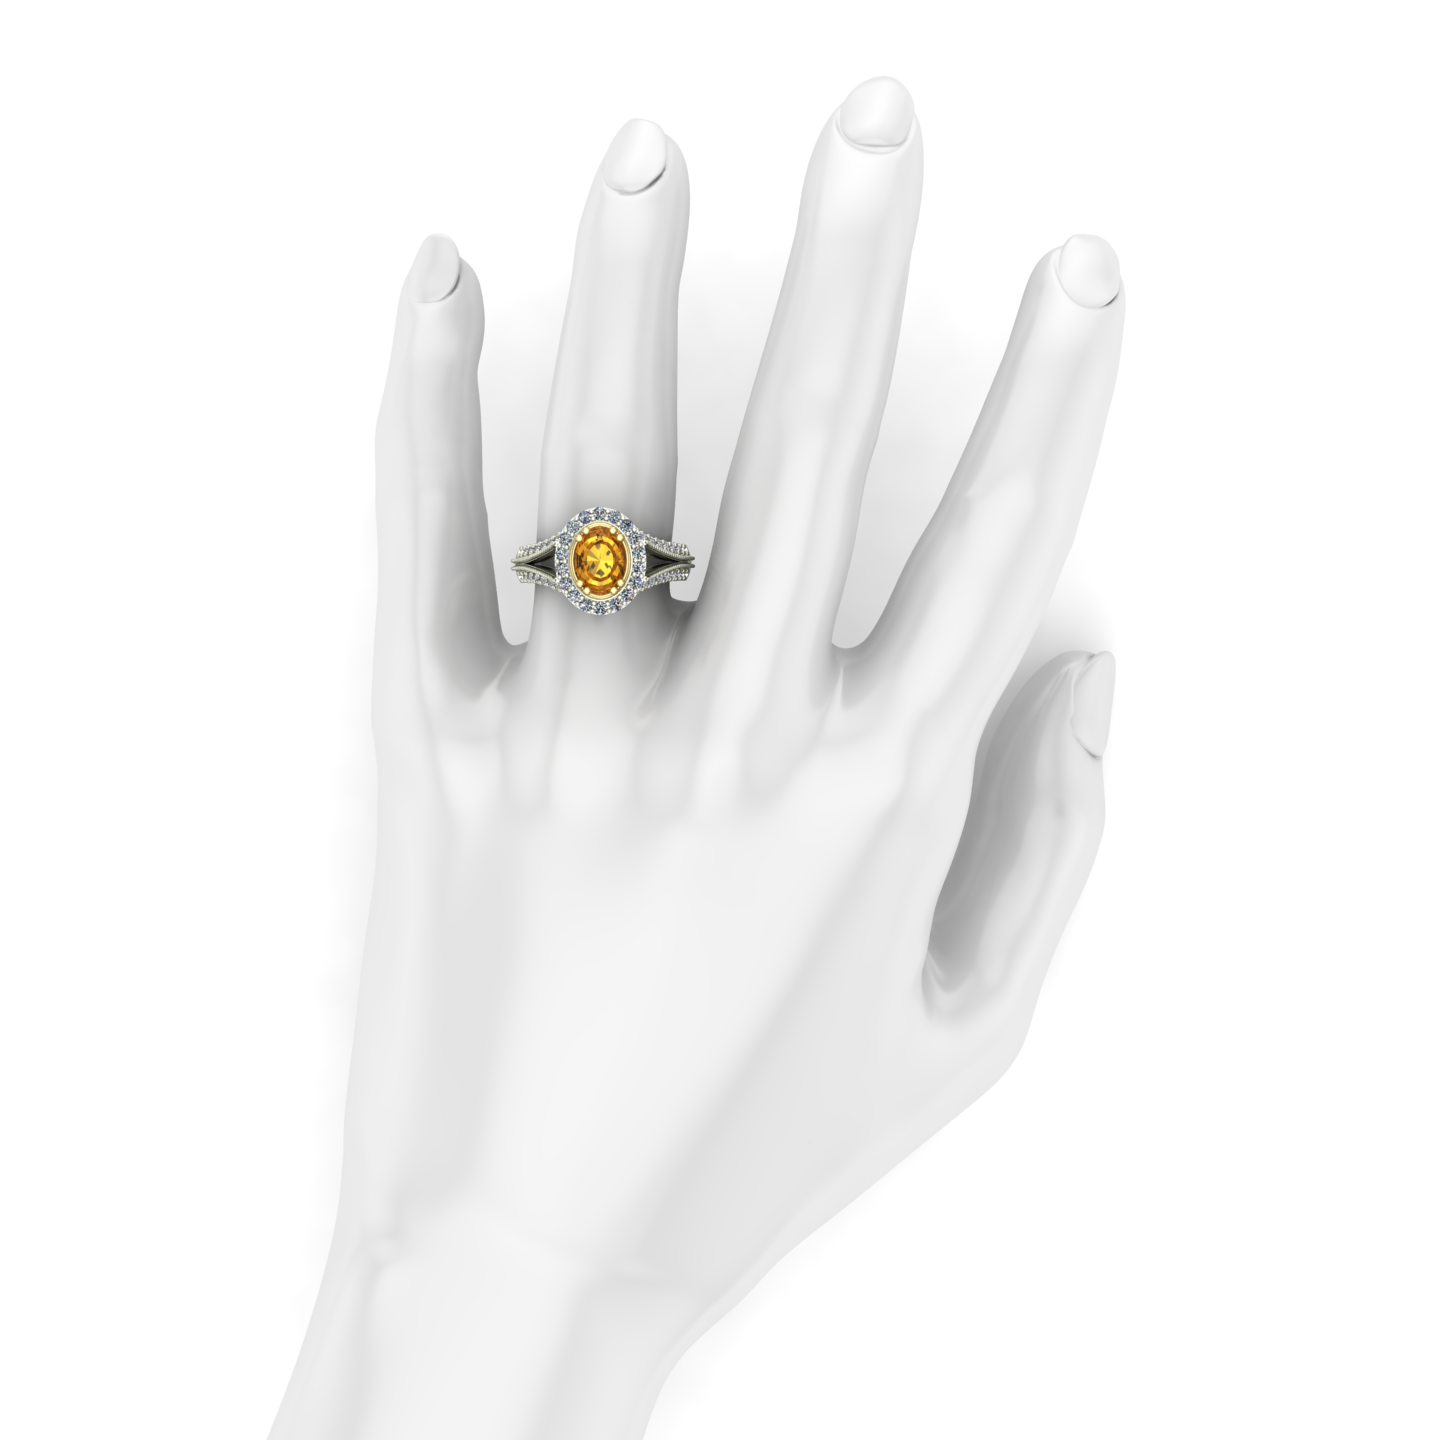 Yellow sapphire and diamond oval scroll ring in 14k yellow and white gold